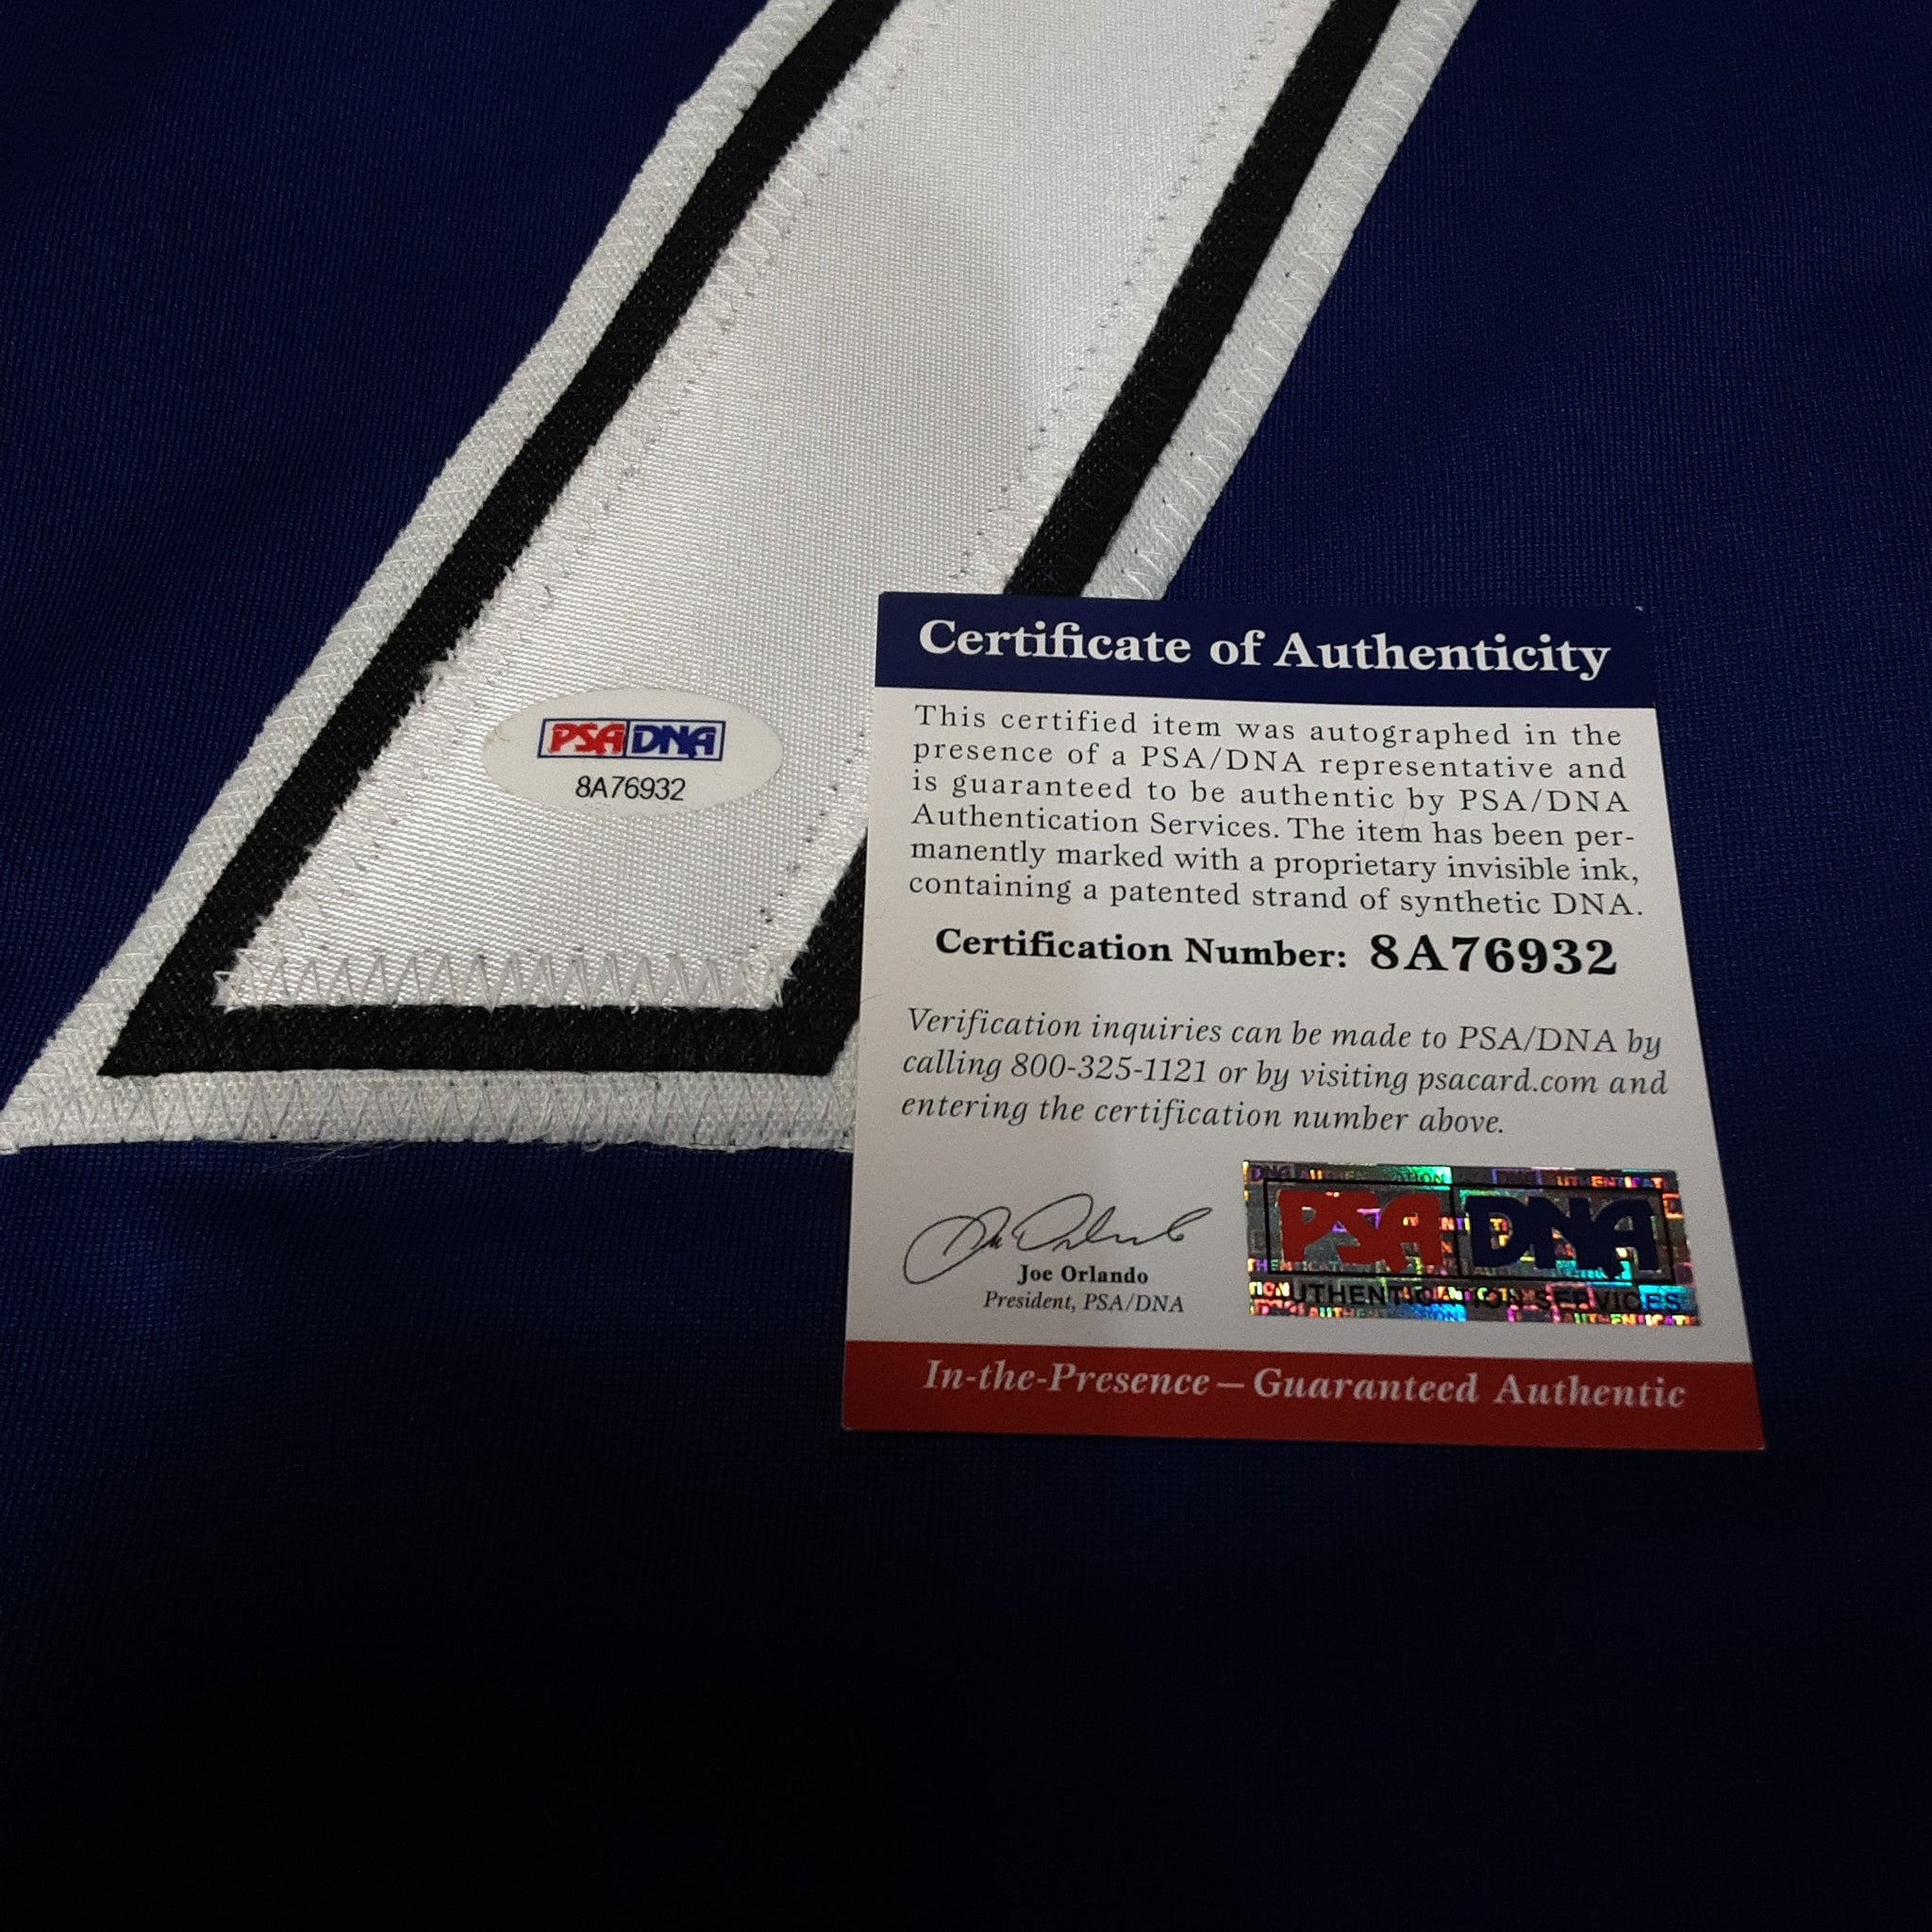 Anthony Cirelli Authentic Signed Pro Style Jersey Autographed PSA